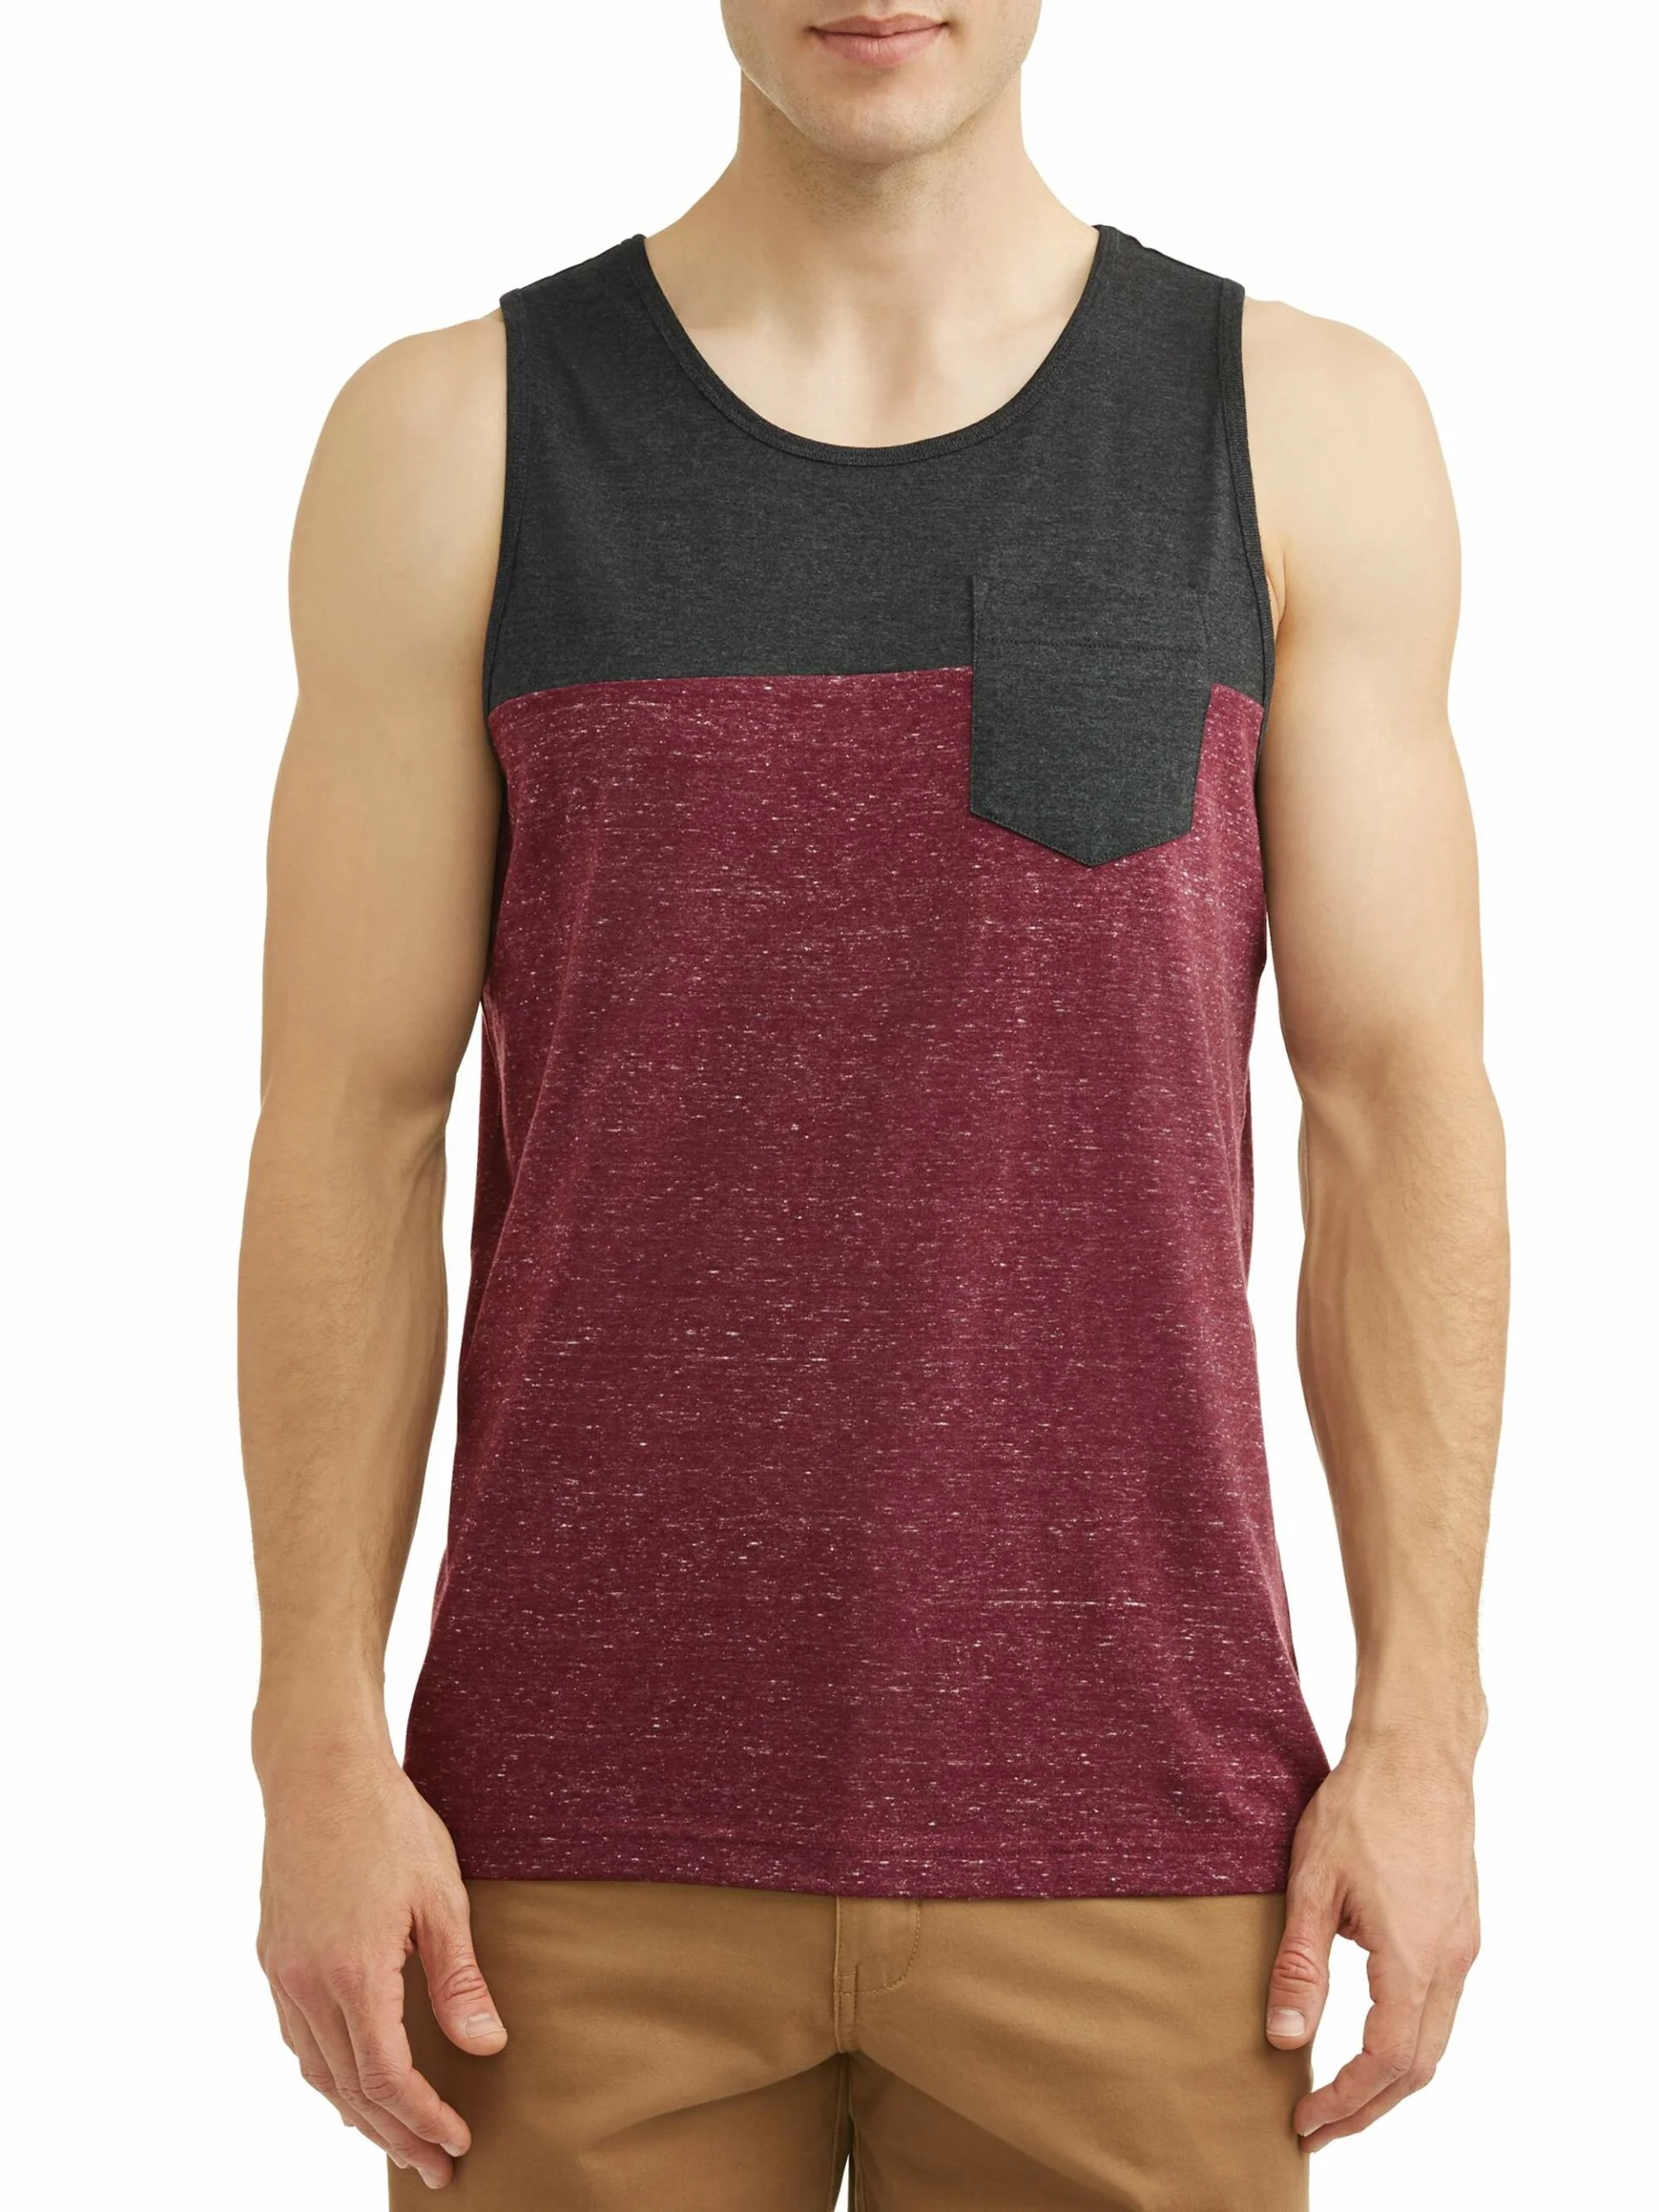 Ribbed Tank Tops - Bangladesh Factory, Suppliers, Manufacturers